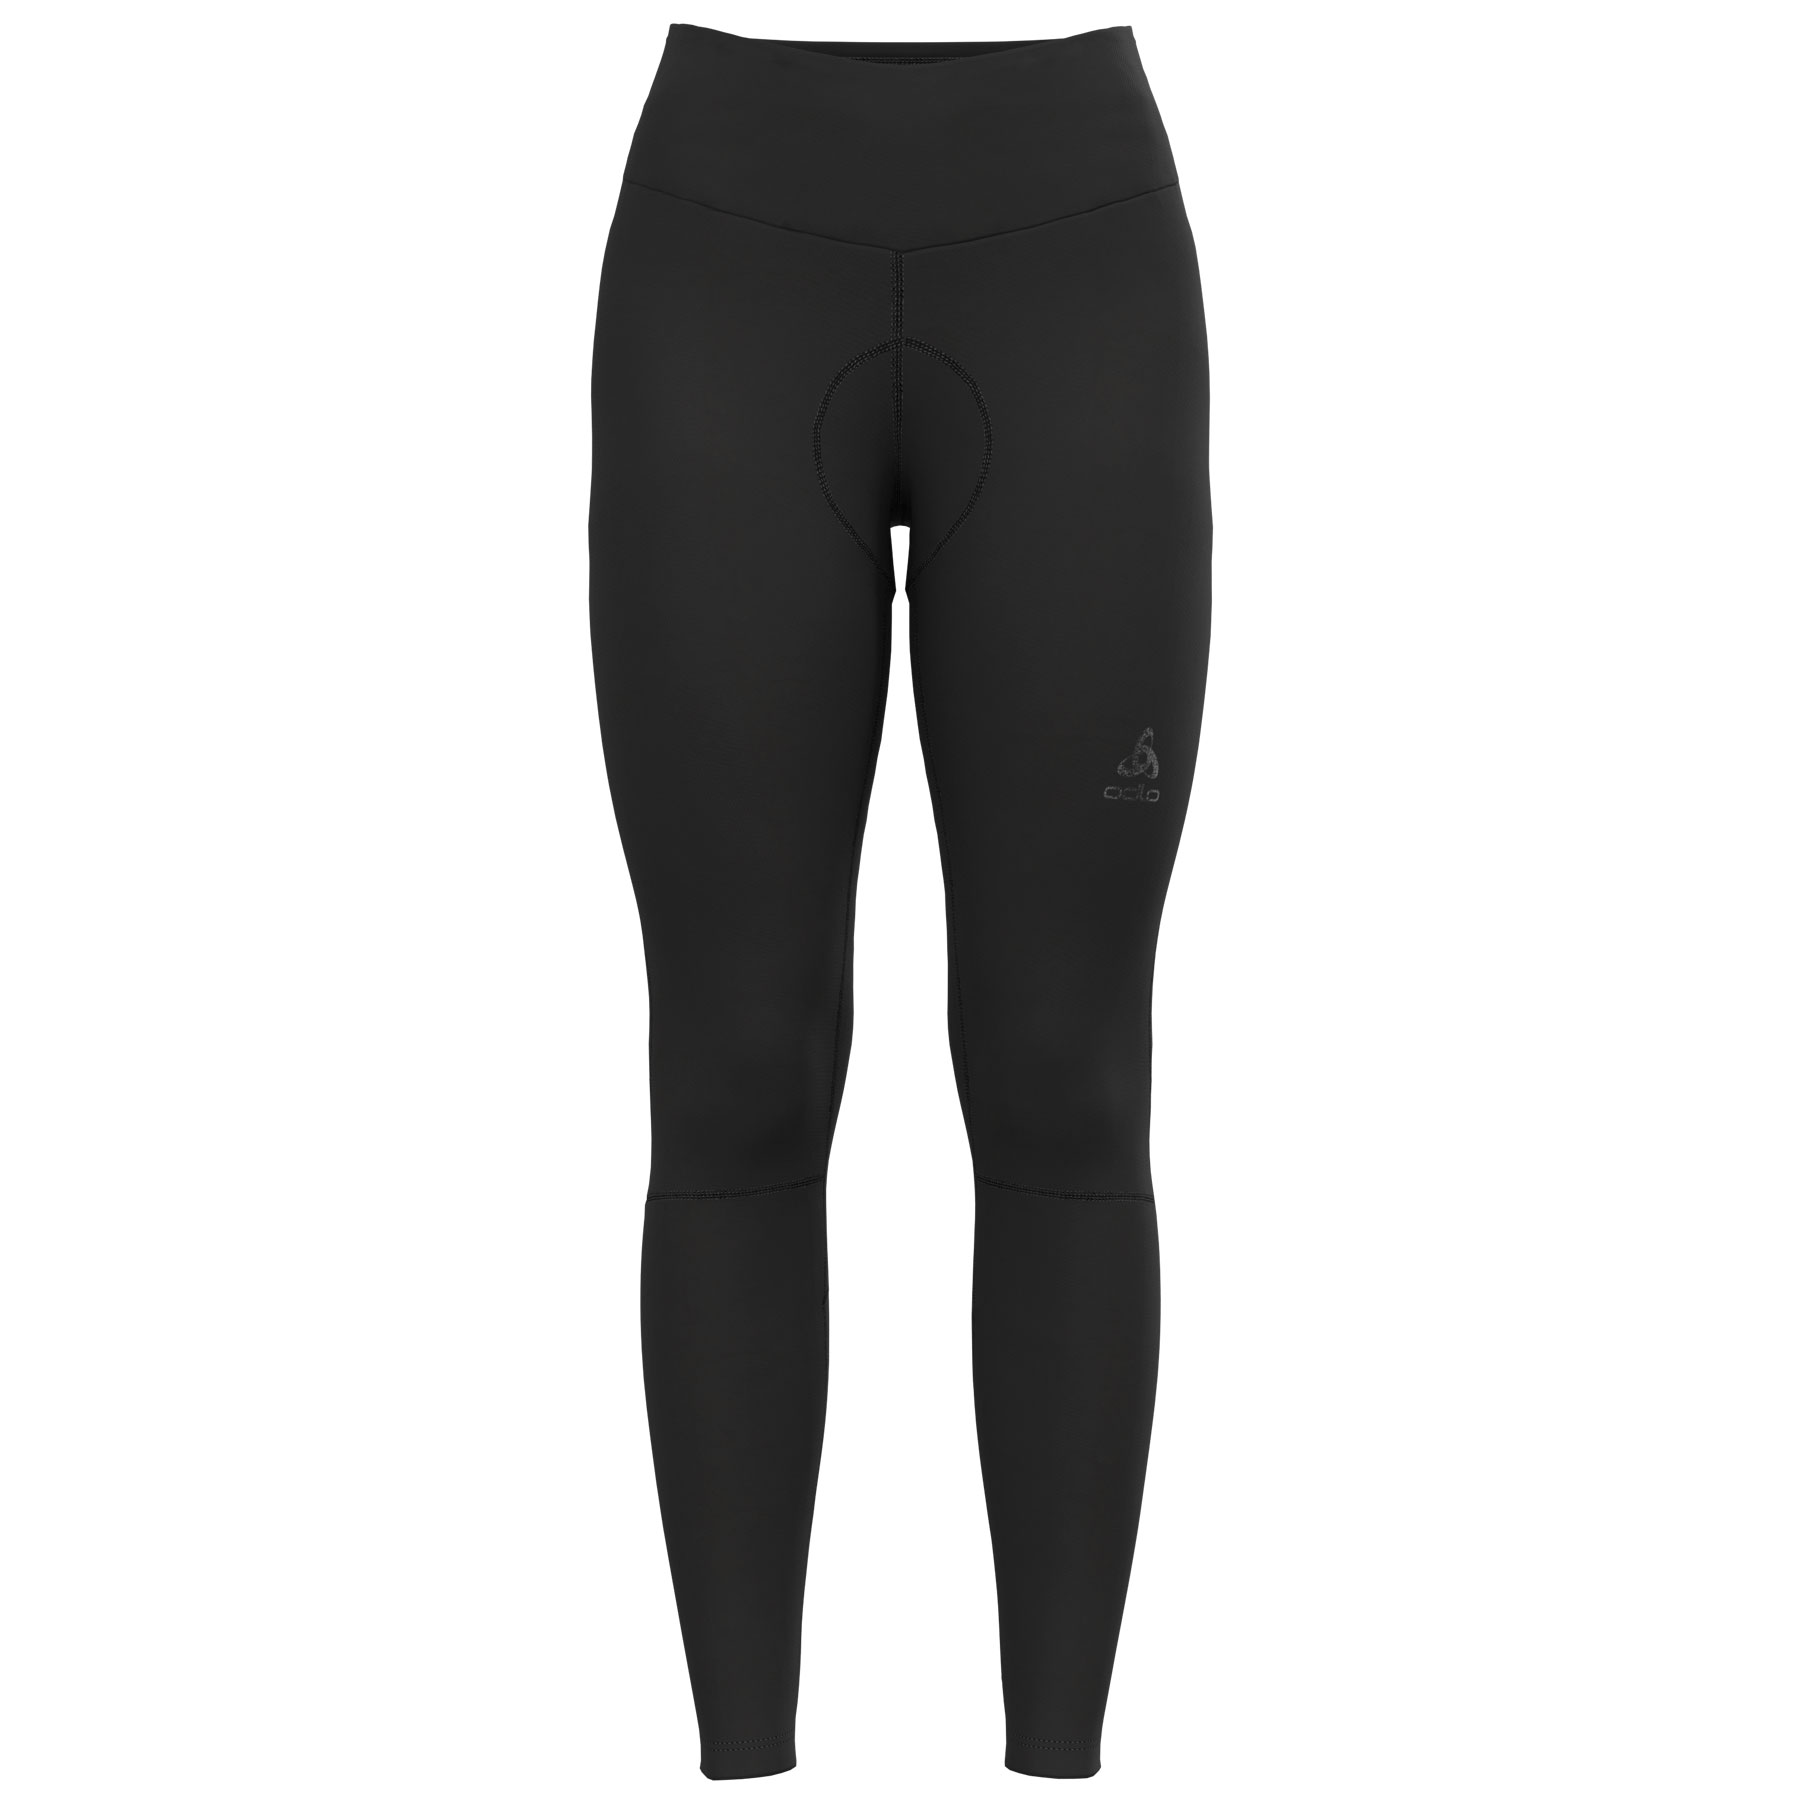 Image of Odlo Zeroweight Warm Cycling Tights Women - black